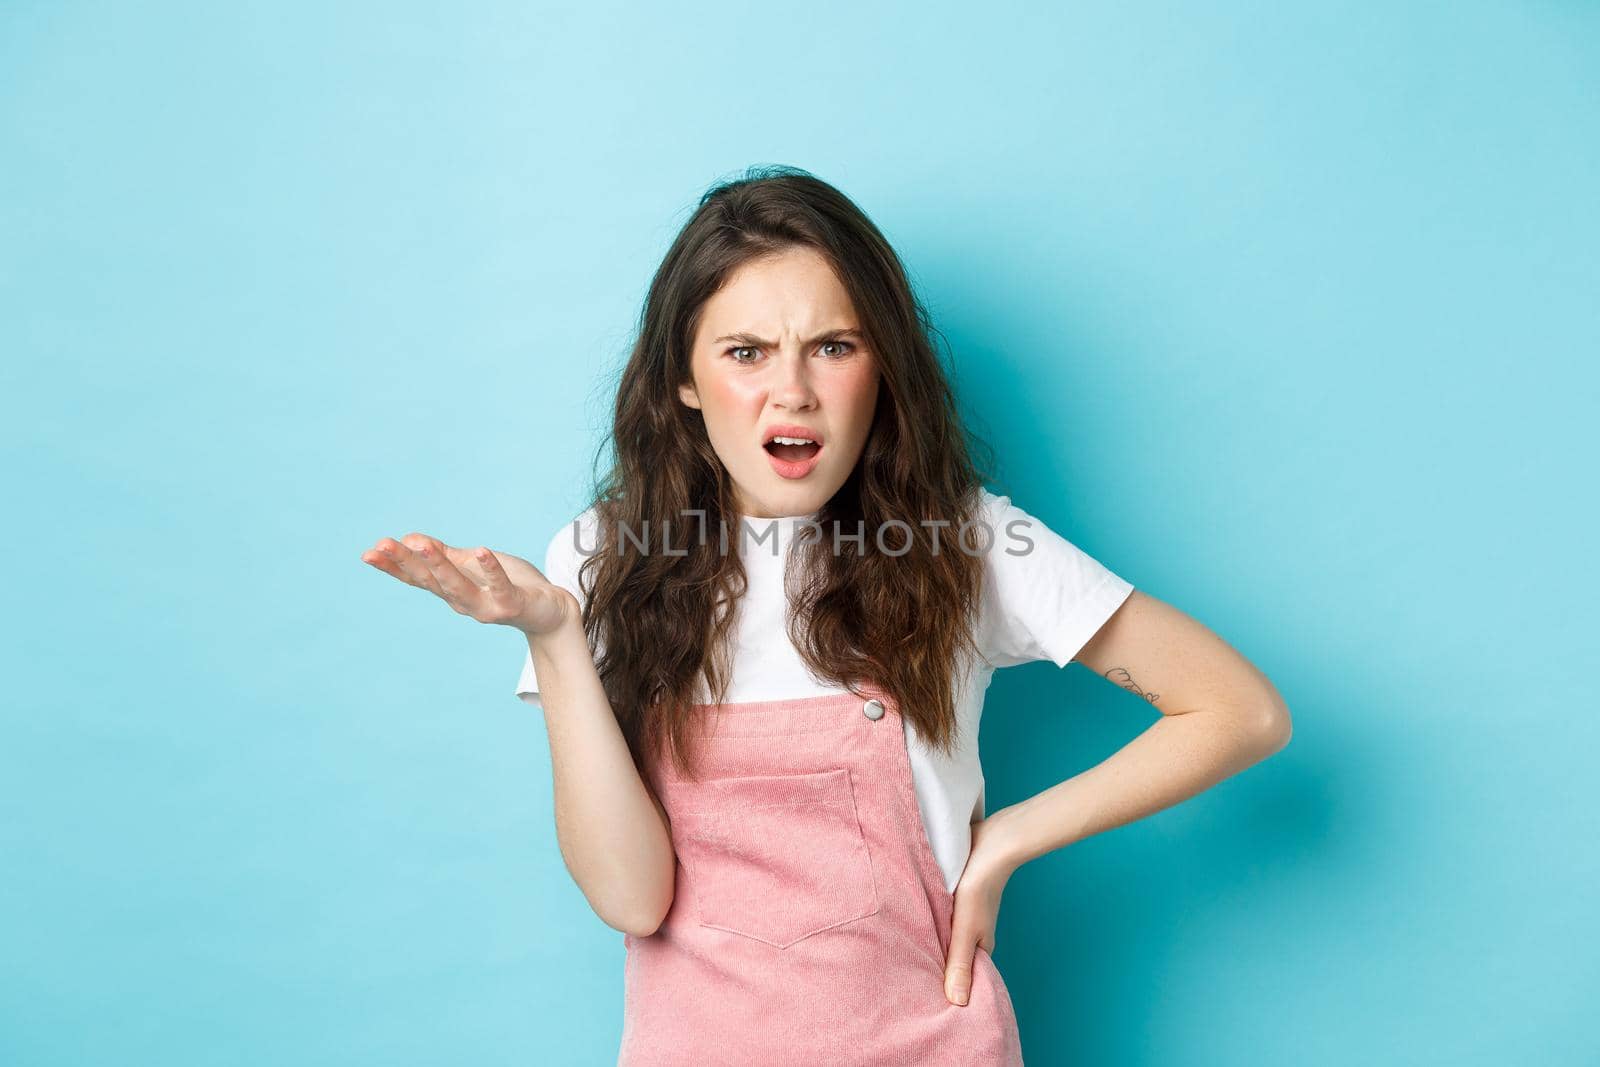 Image of confused and annoyed young woman raising hand and pointing at something terrible, staring puzzled at camera with pissed-off face, standing over blue background.